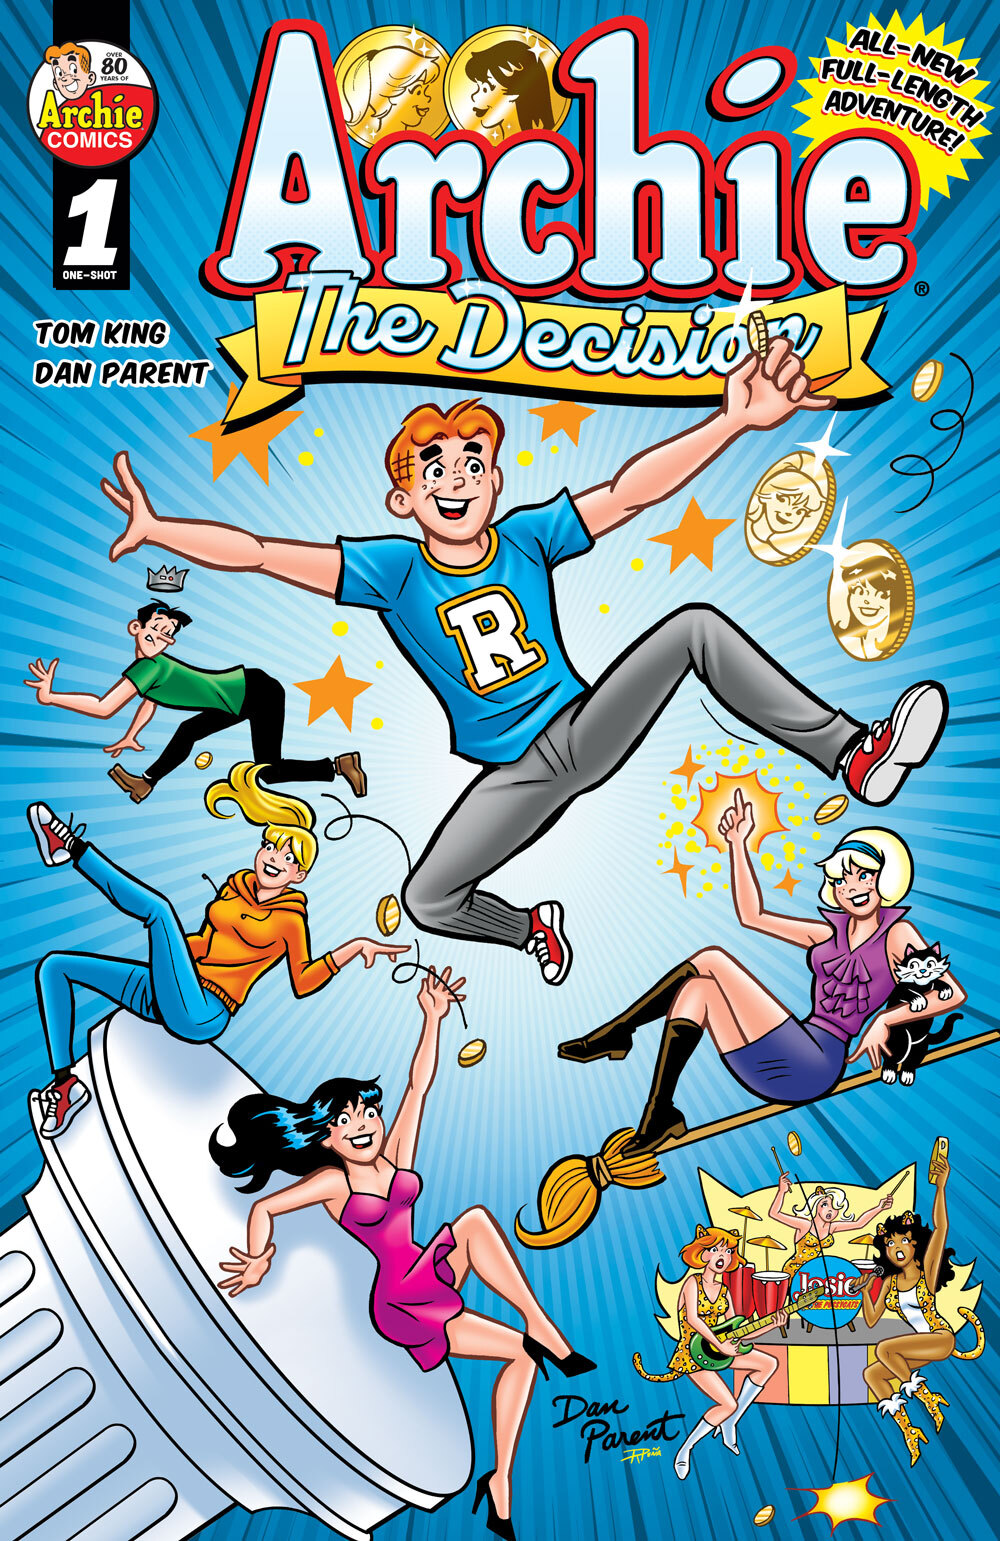 Archie and the rest of the Riverdale gang, including Jughead, Betty, Veronica, and others, float in front of a blue background after being toppled from a pedestal. Several coins flip in the background, and on two of them we can see the images of Betty and Veronica. 